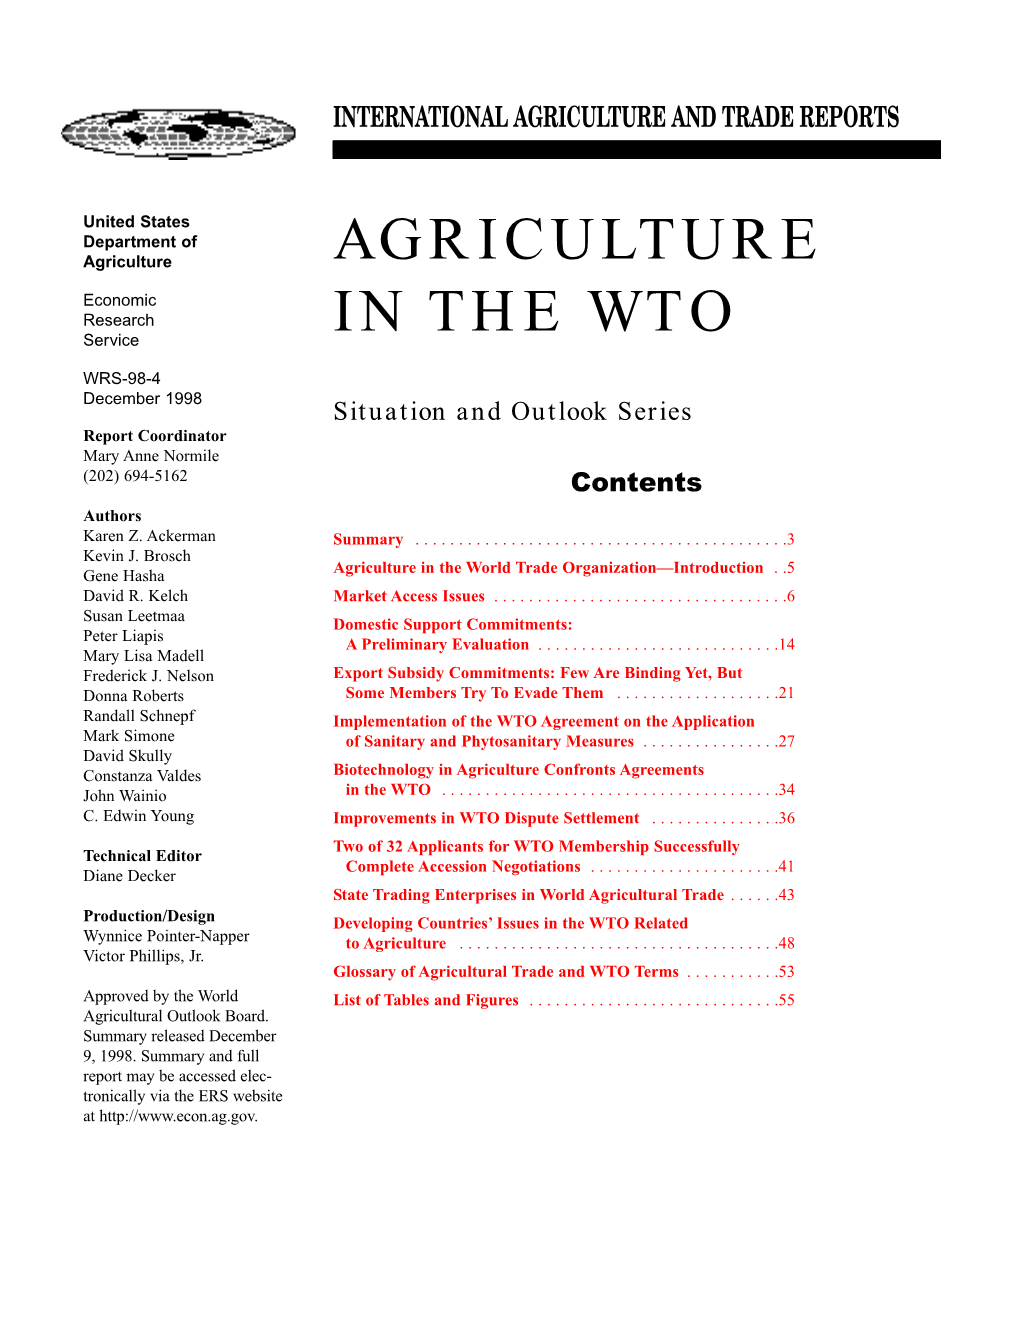 Agriculture in the World Trade Organization—Introduction